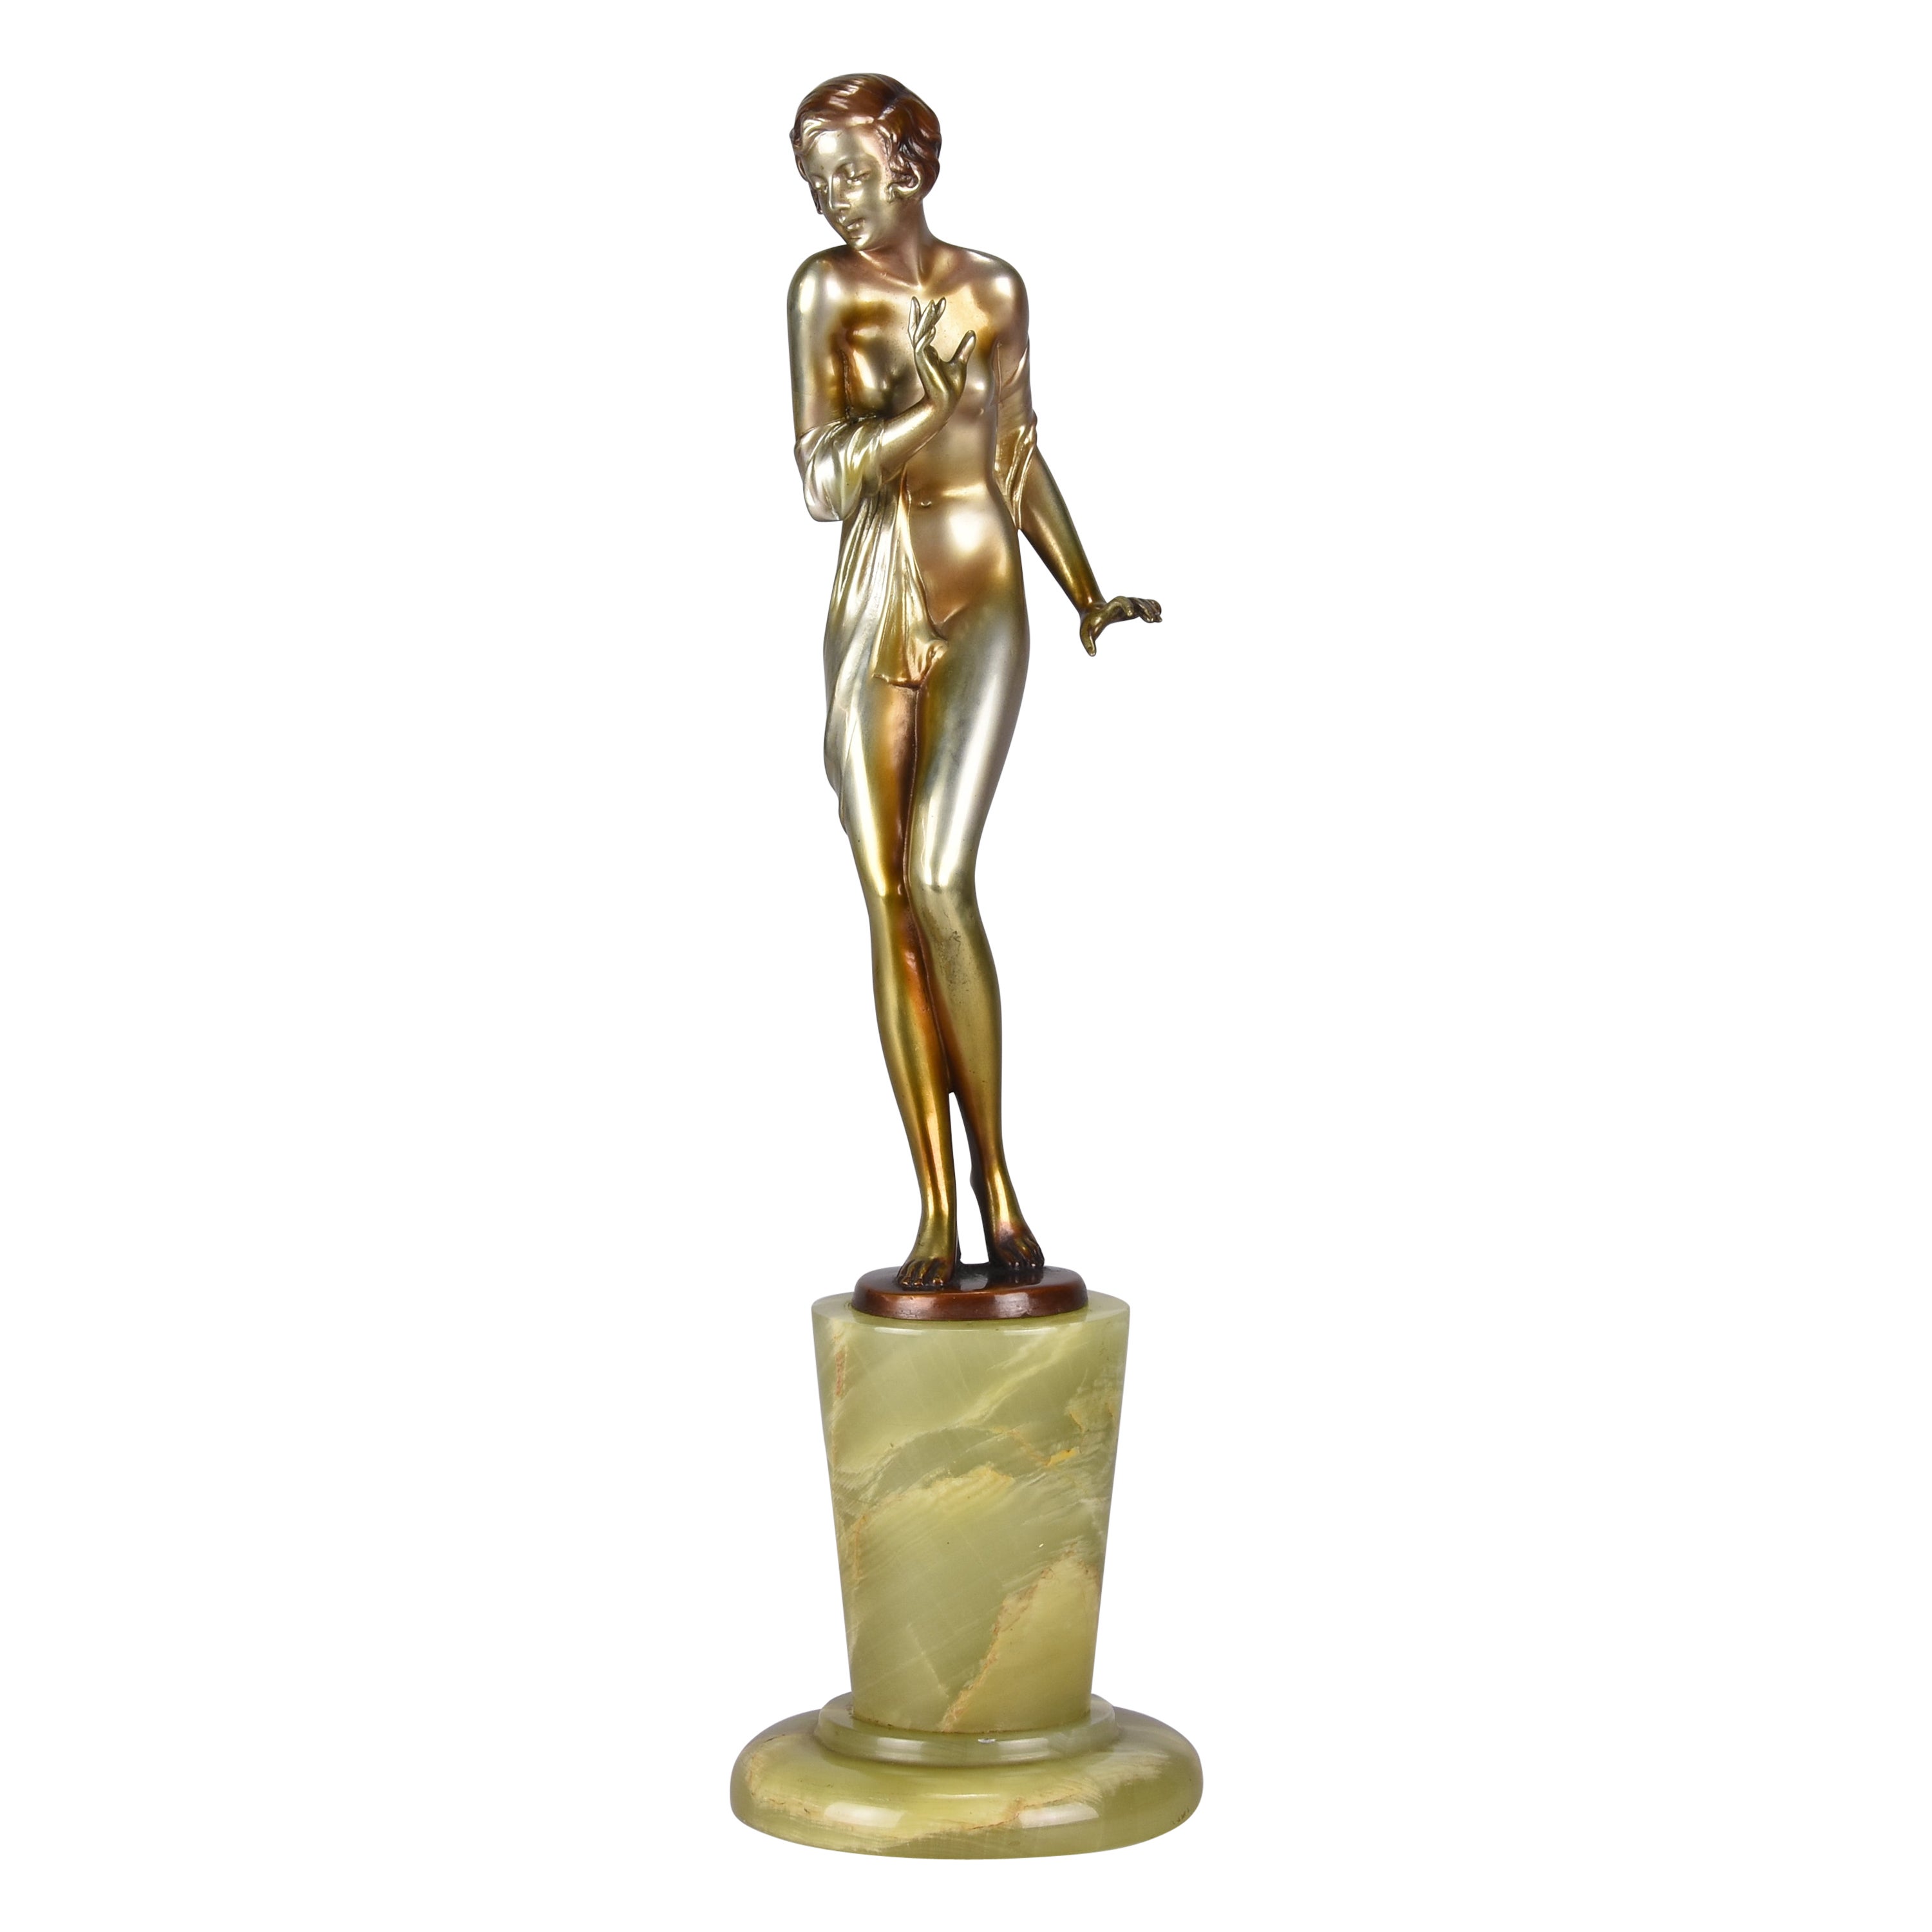 Early 20th Century Austrian Cold-Painted Bronze "Modesty" by Josef Lorenzl For Sale